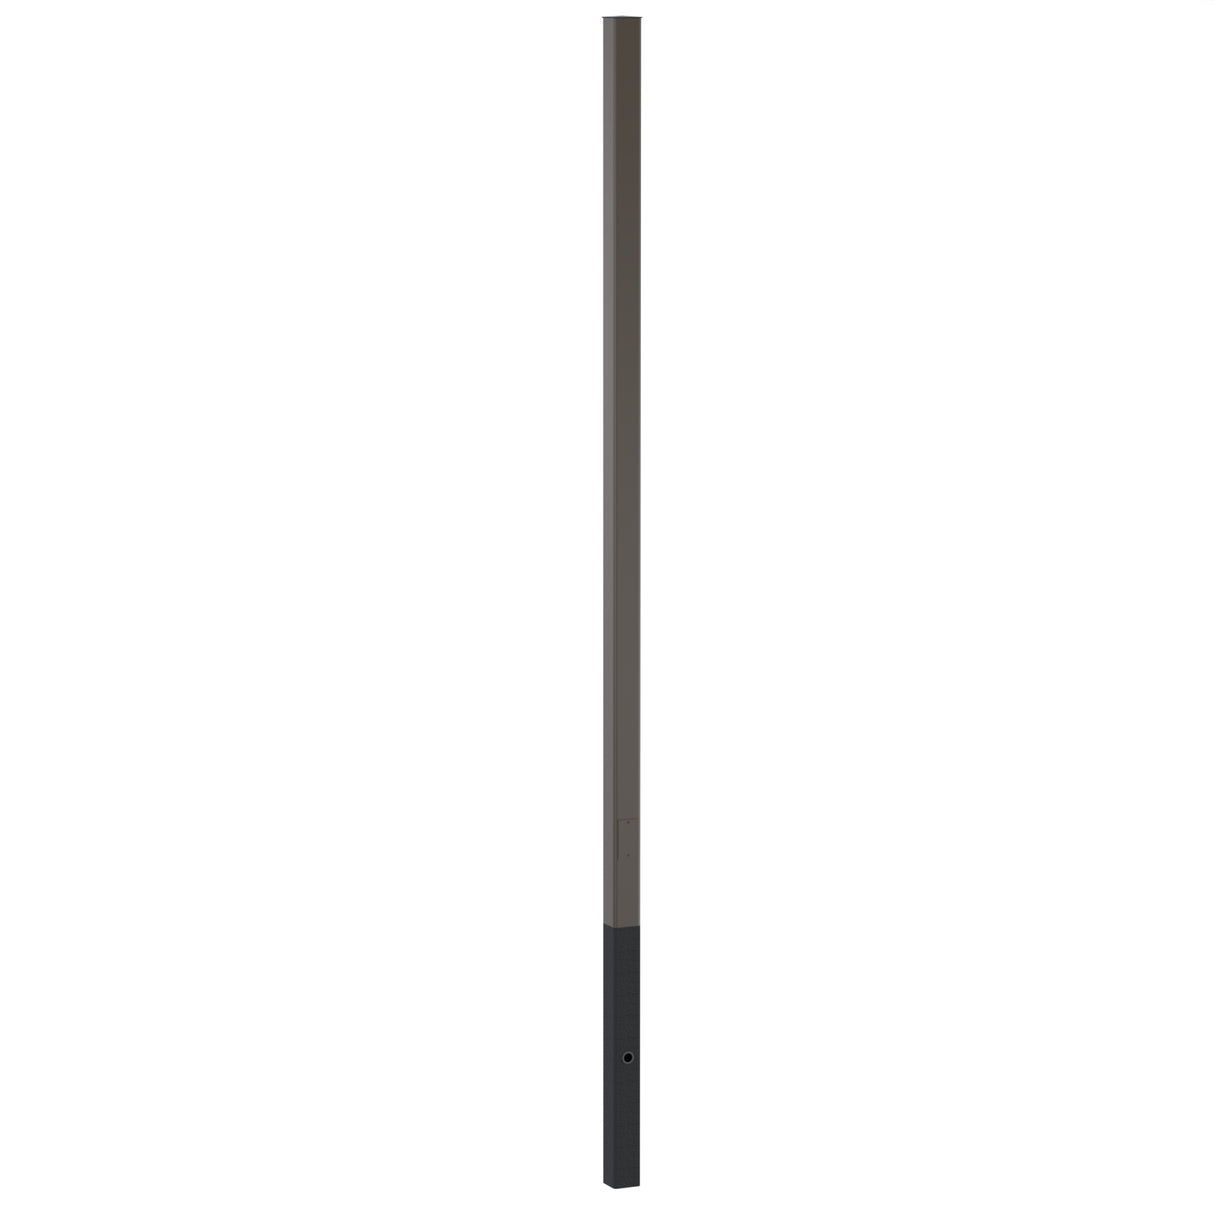 12' Above Grade x 4.0" OD  x 0.125" Thick, Square Straight Aluminum, Direct Burial Light Pole